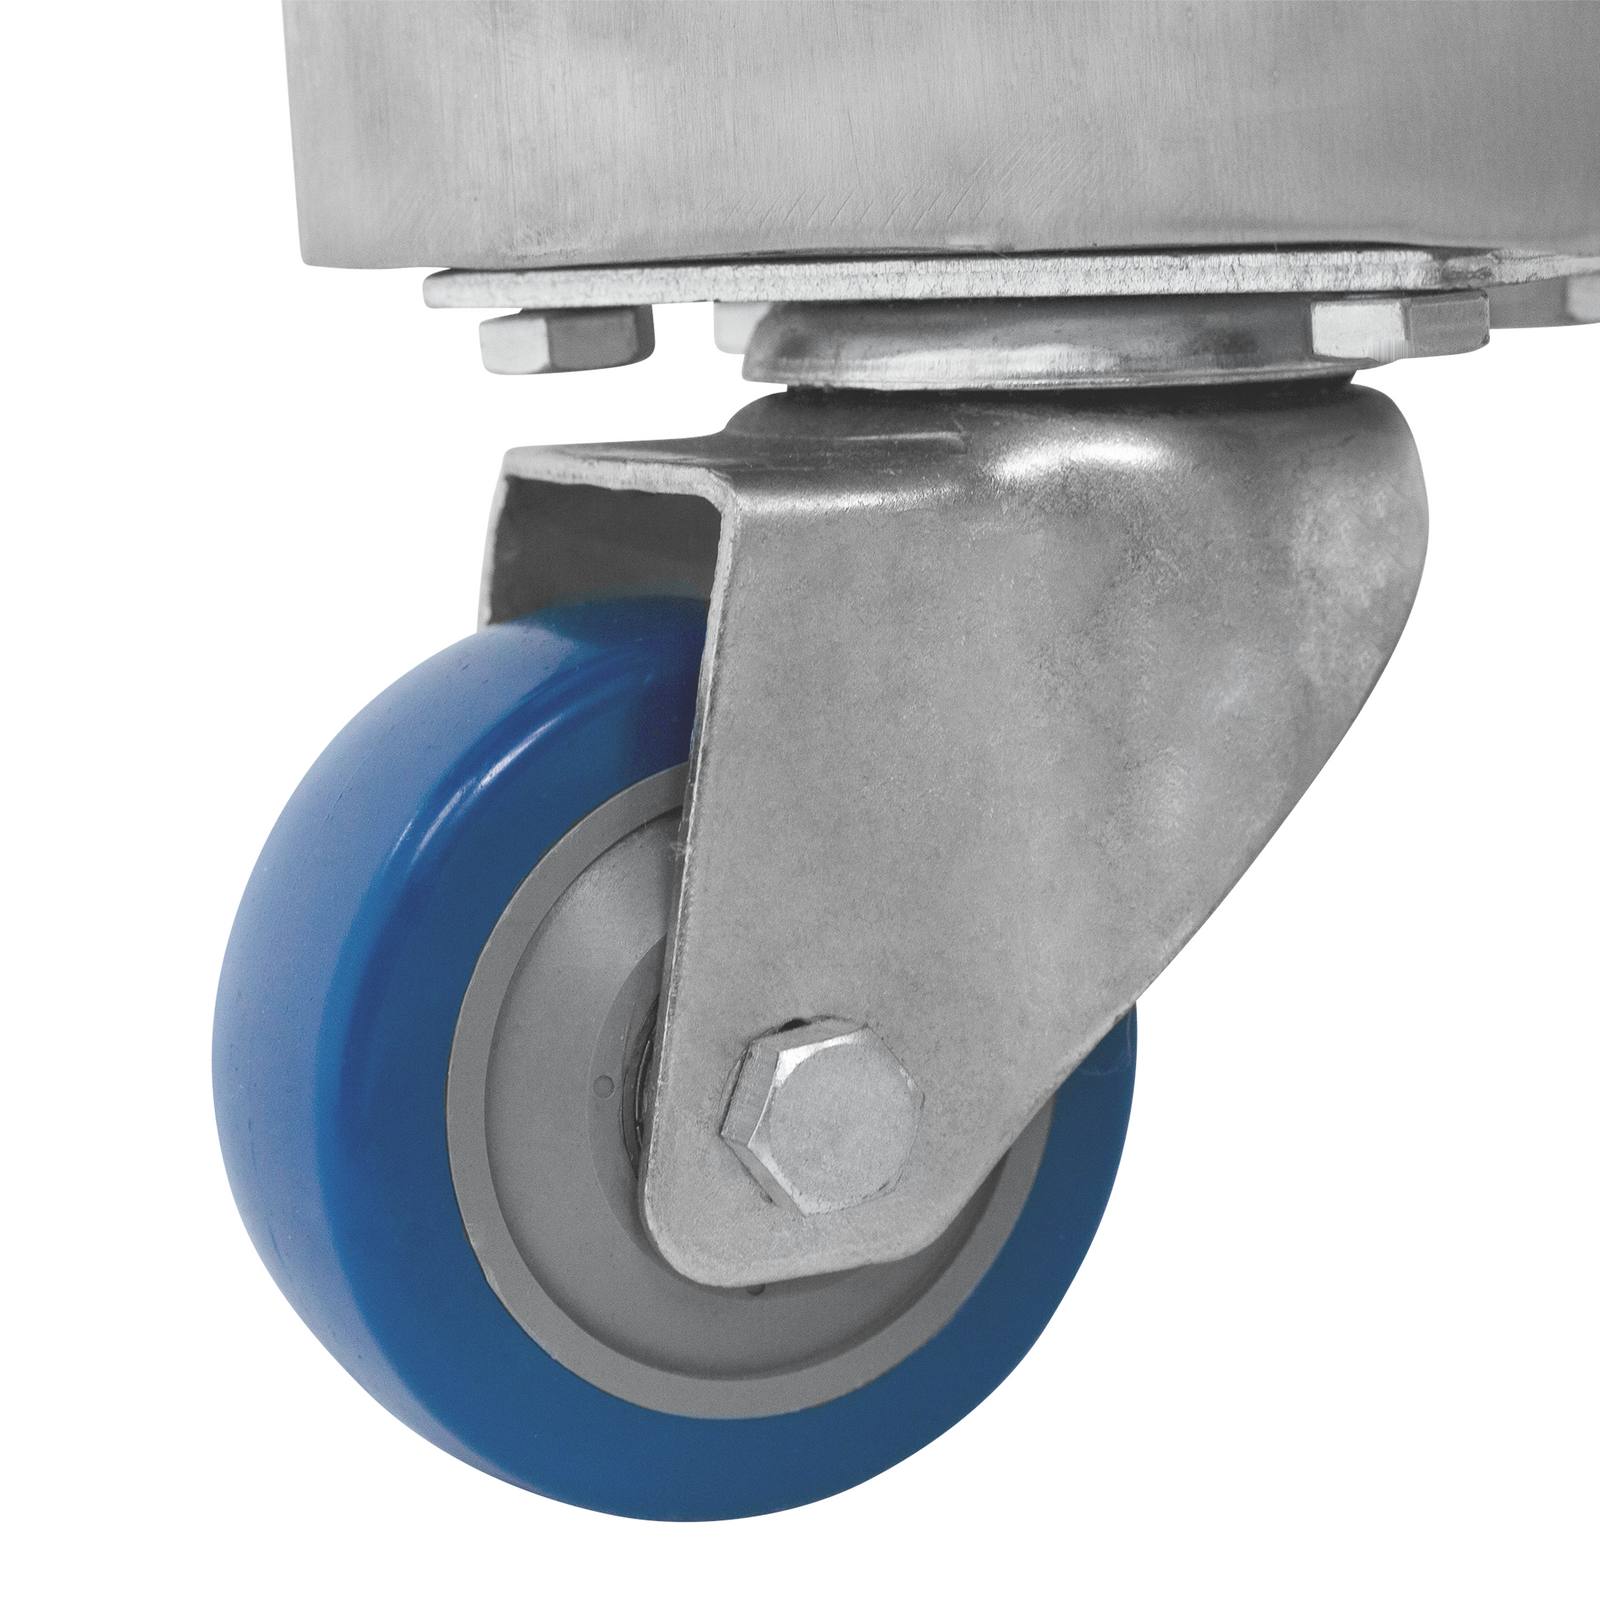 Close-up of a blue wheel belonging to the JORES TECHNOLOGIES® Vertical Form Fill and Seal (VFFS) machine for packing powders into sachet-type packages